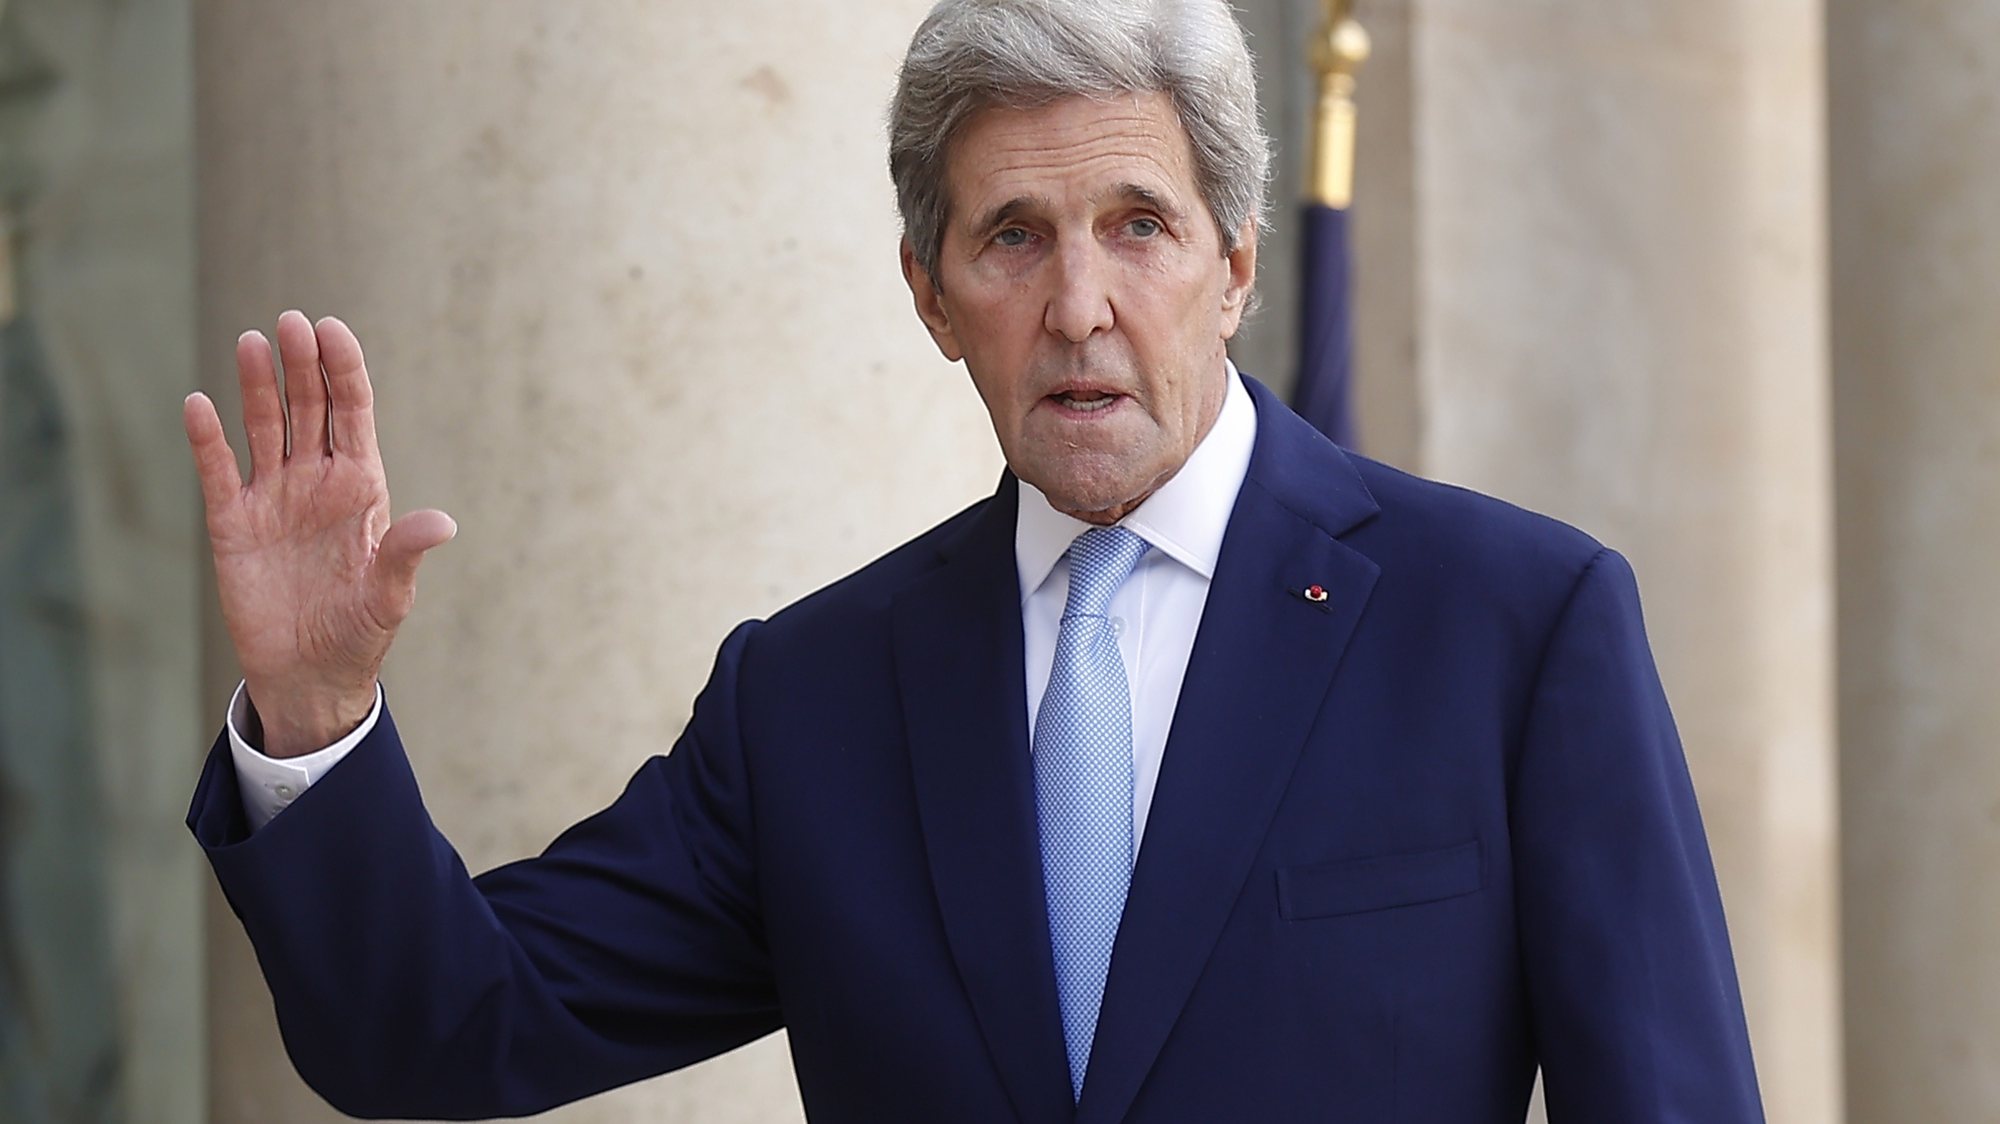 epa09505389 US Special Presidential Envoy for Climate John Kerry arrives for a One Planet Summit meeting with French President Emmanuel Macron (unseen) at the Elysee Palace in Paris, France, 04 September 2021.  EPA/IAN LANGSDON